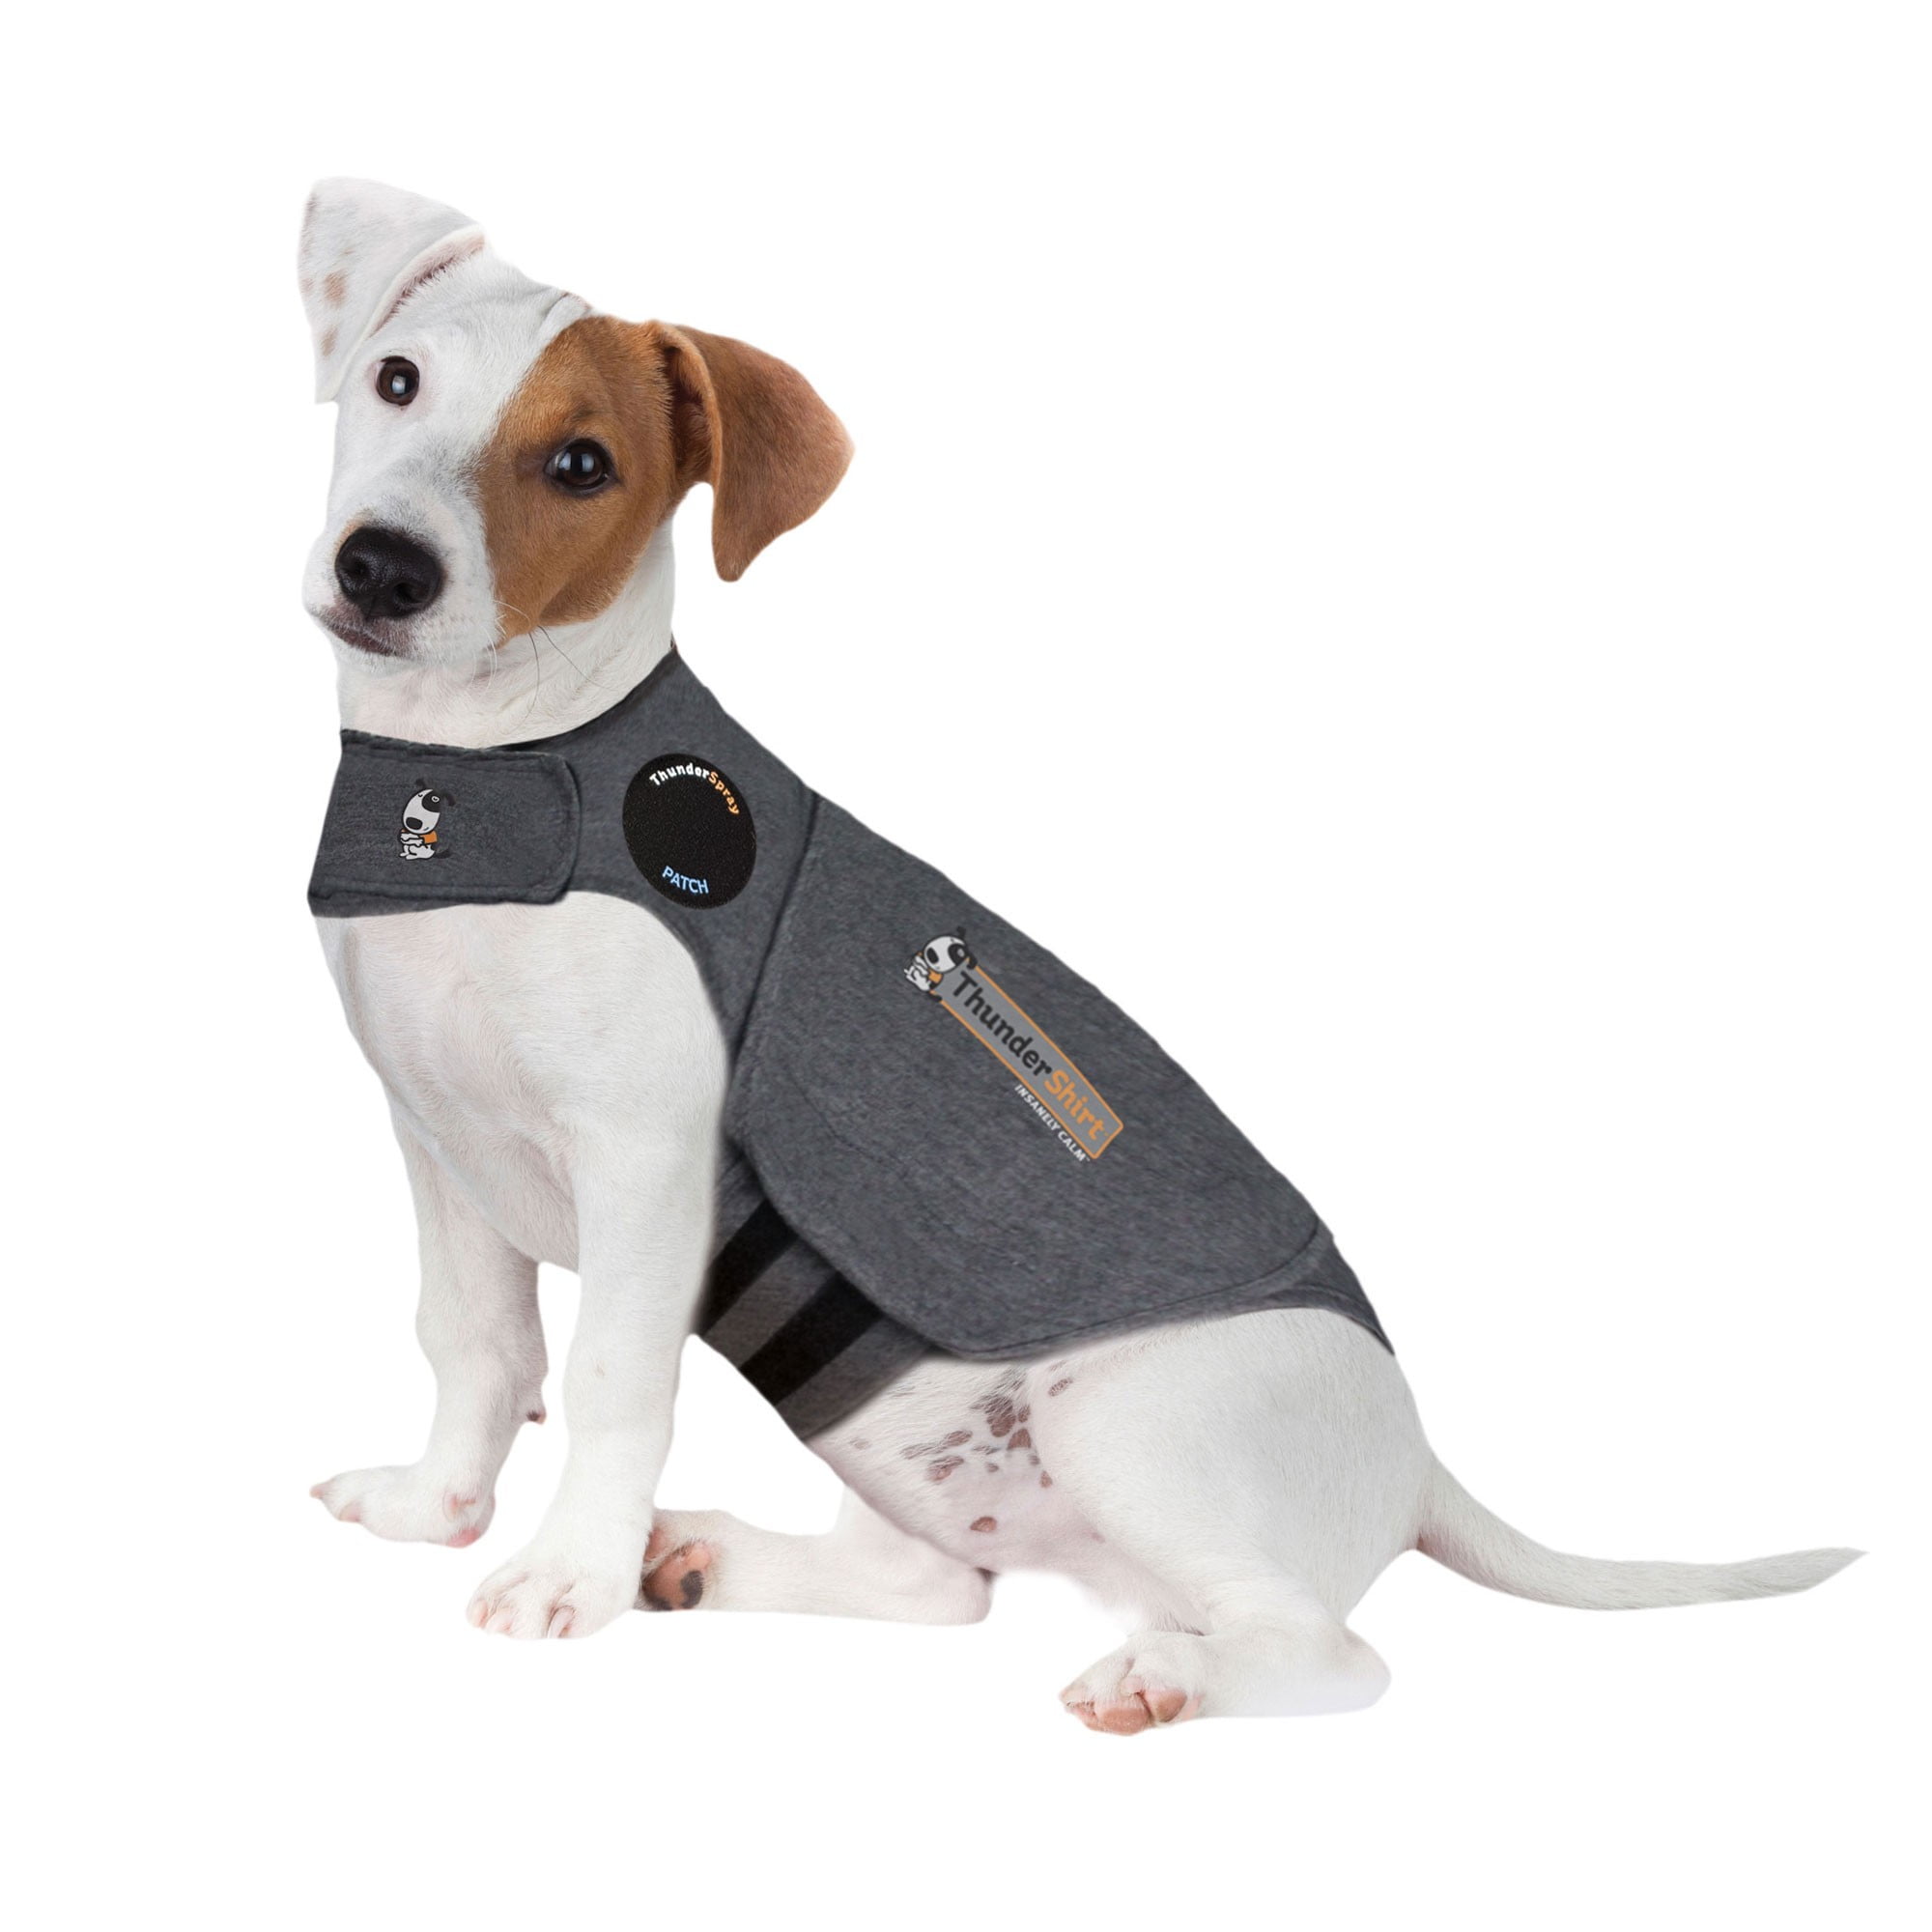 ThunderShirt Anxiety Jacket for Dogs 